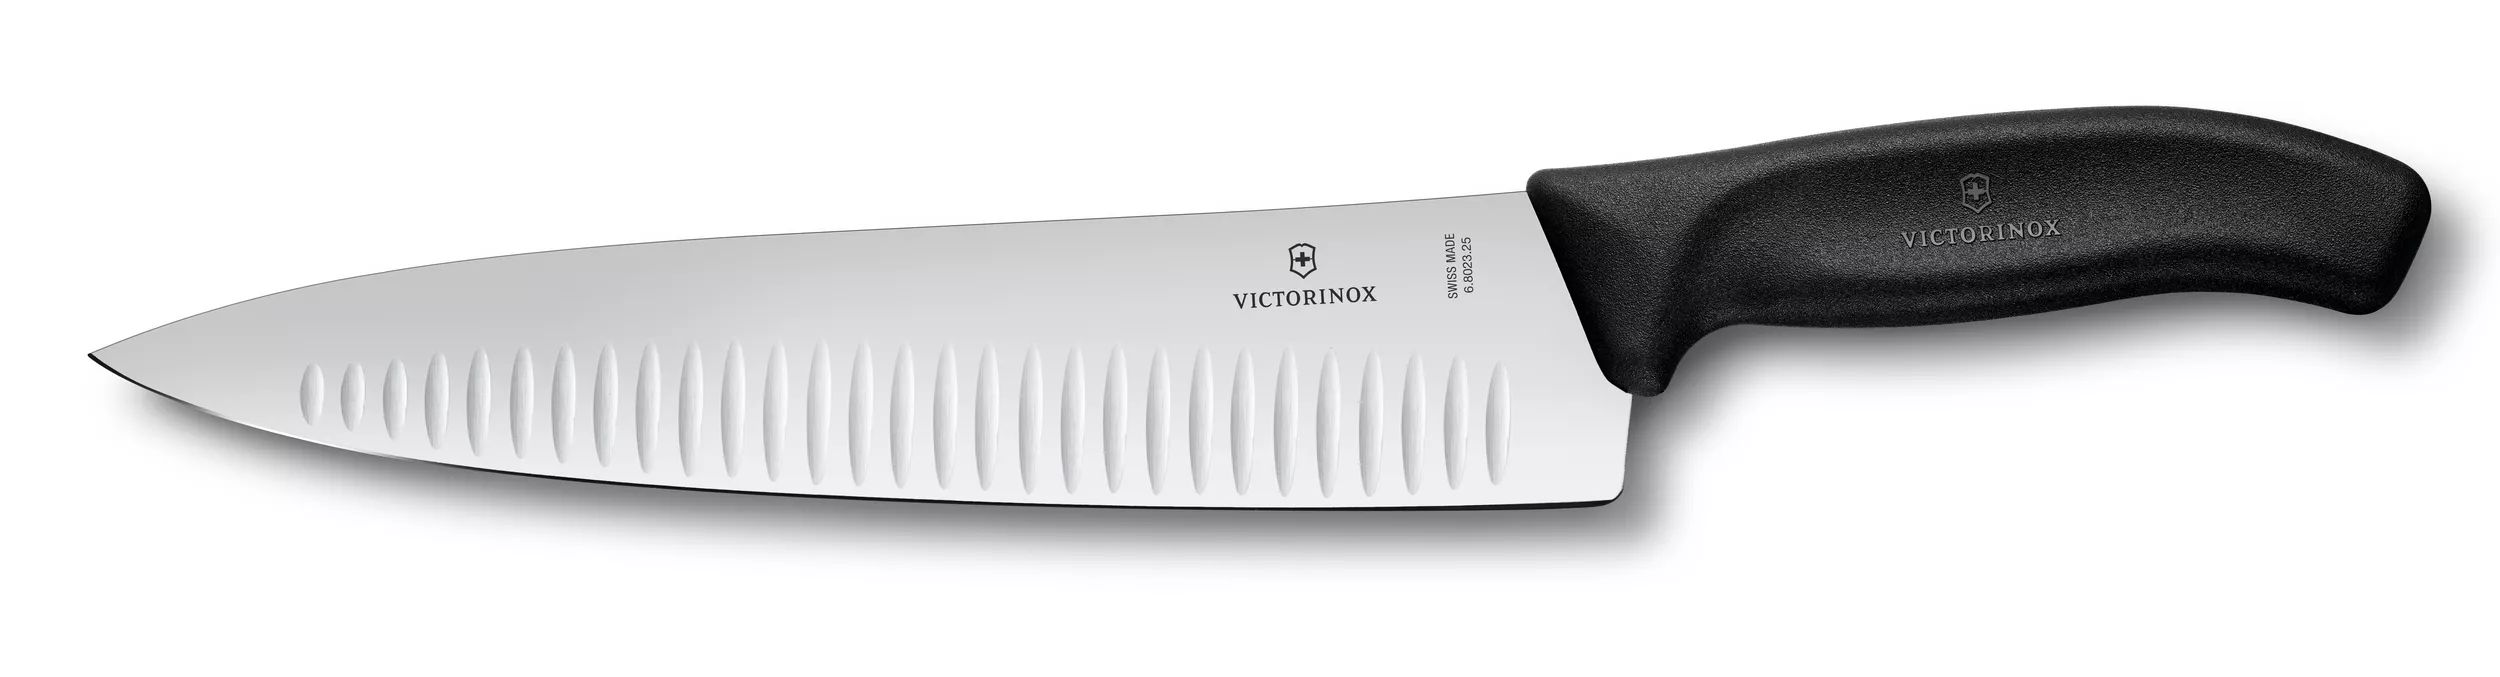 Swiss Classic Chef’s Knife, fluted edge-6.8023.25G